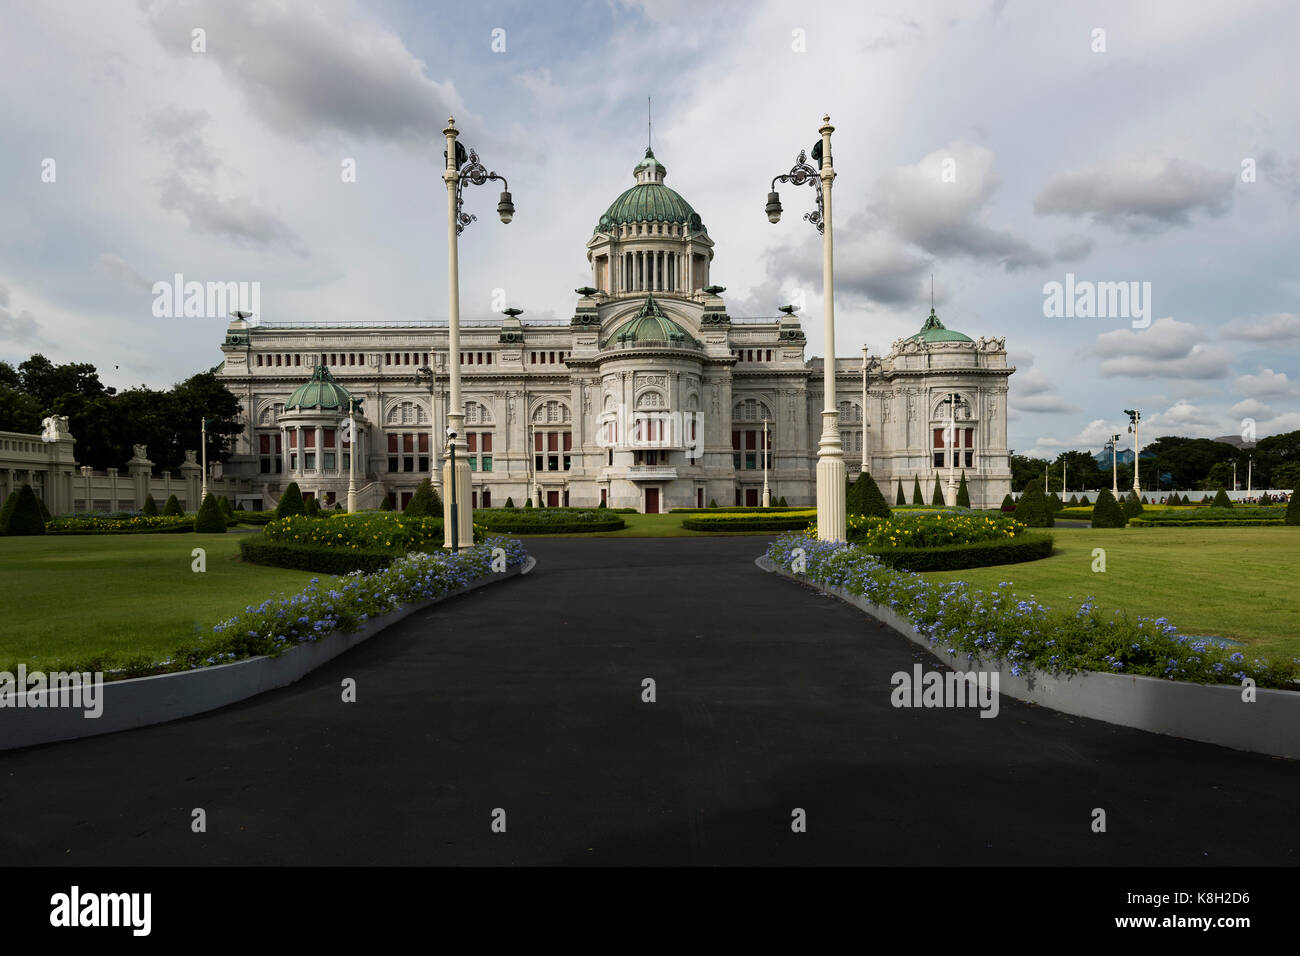 The Ananta Samakhom Throne Hall is a royal reception hall within Dusit Palace in Bangkok, Thailand. It was commissioned by King Chulalongkorn (Rama V) Stock Photo